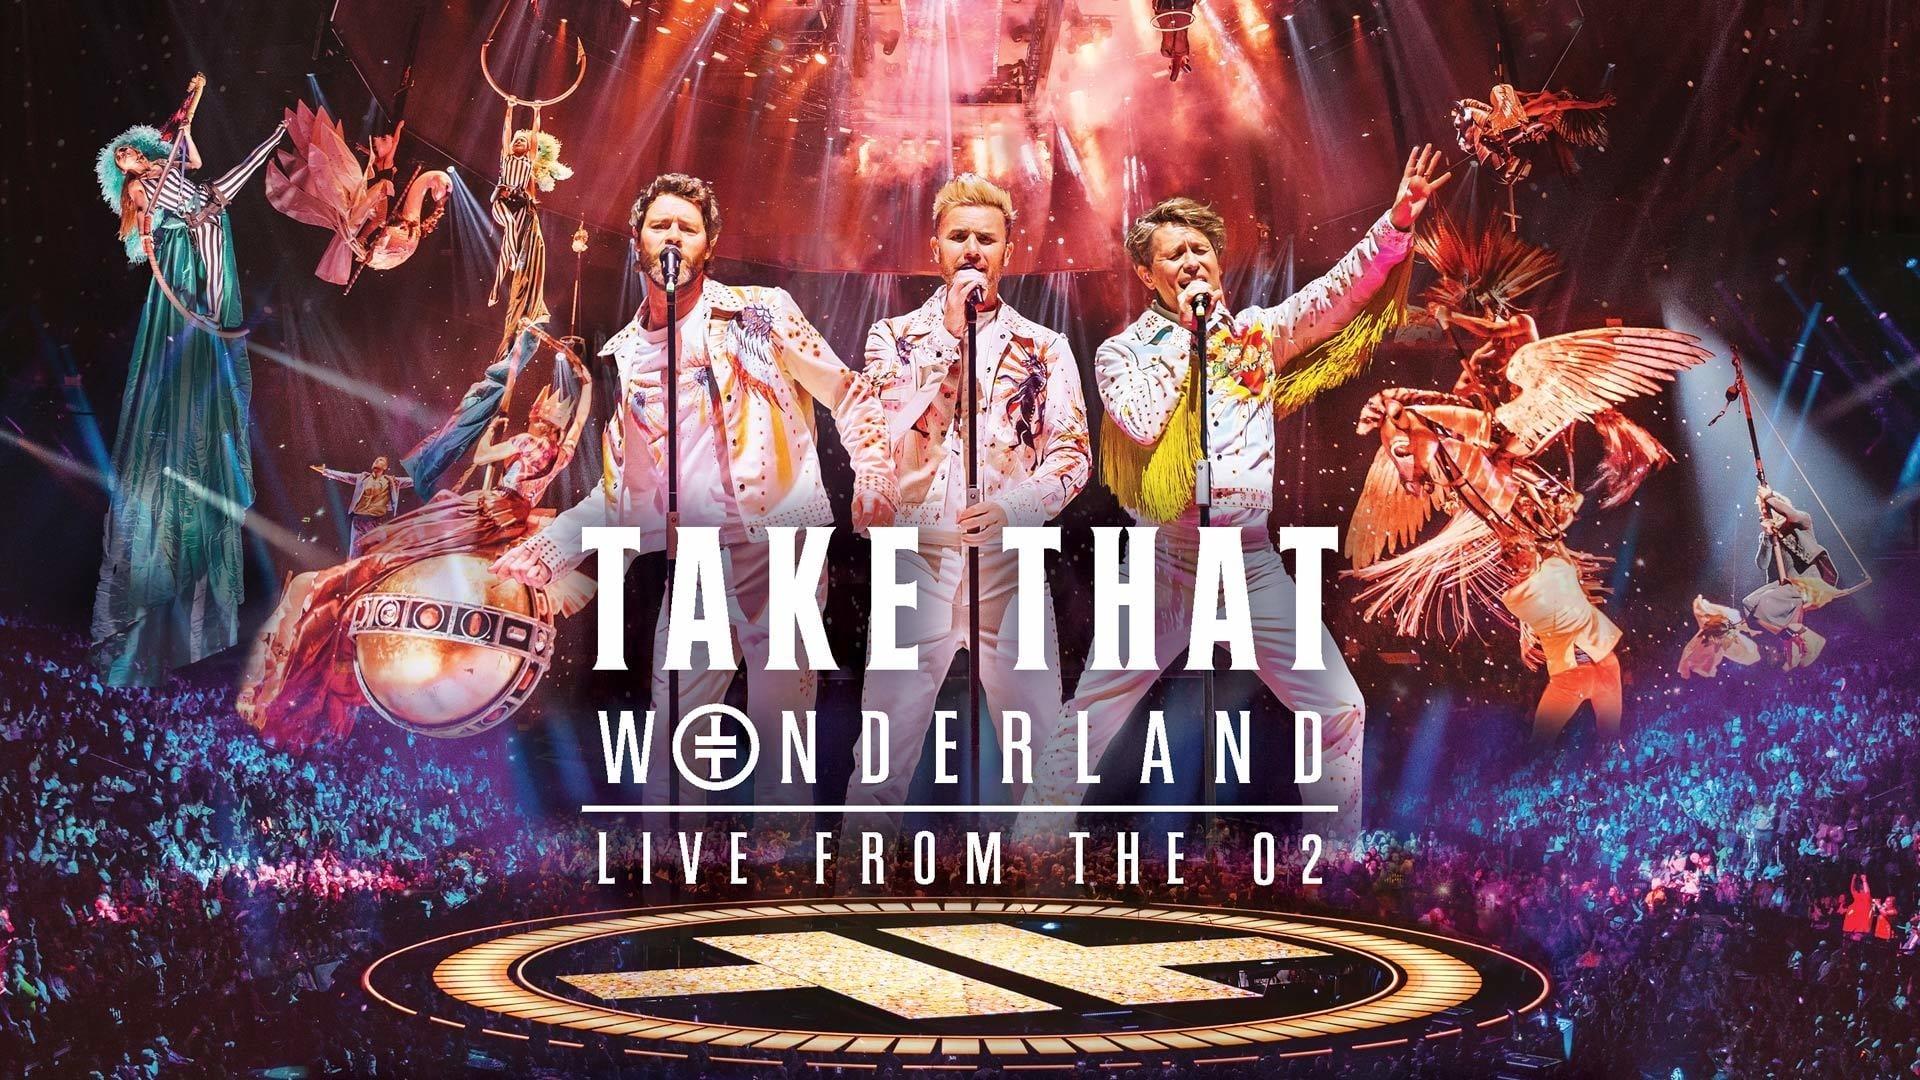 Take That: Wonderland Live from the O2 backdrop